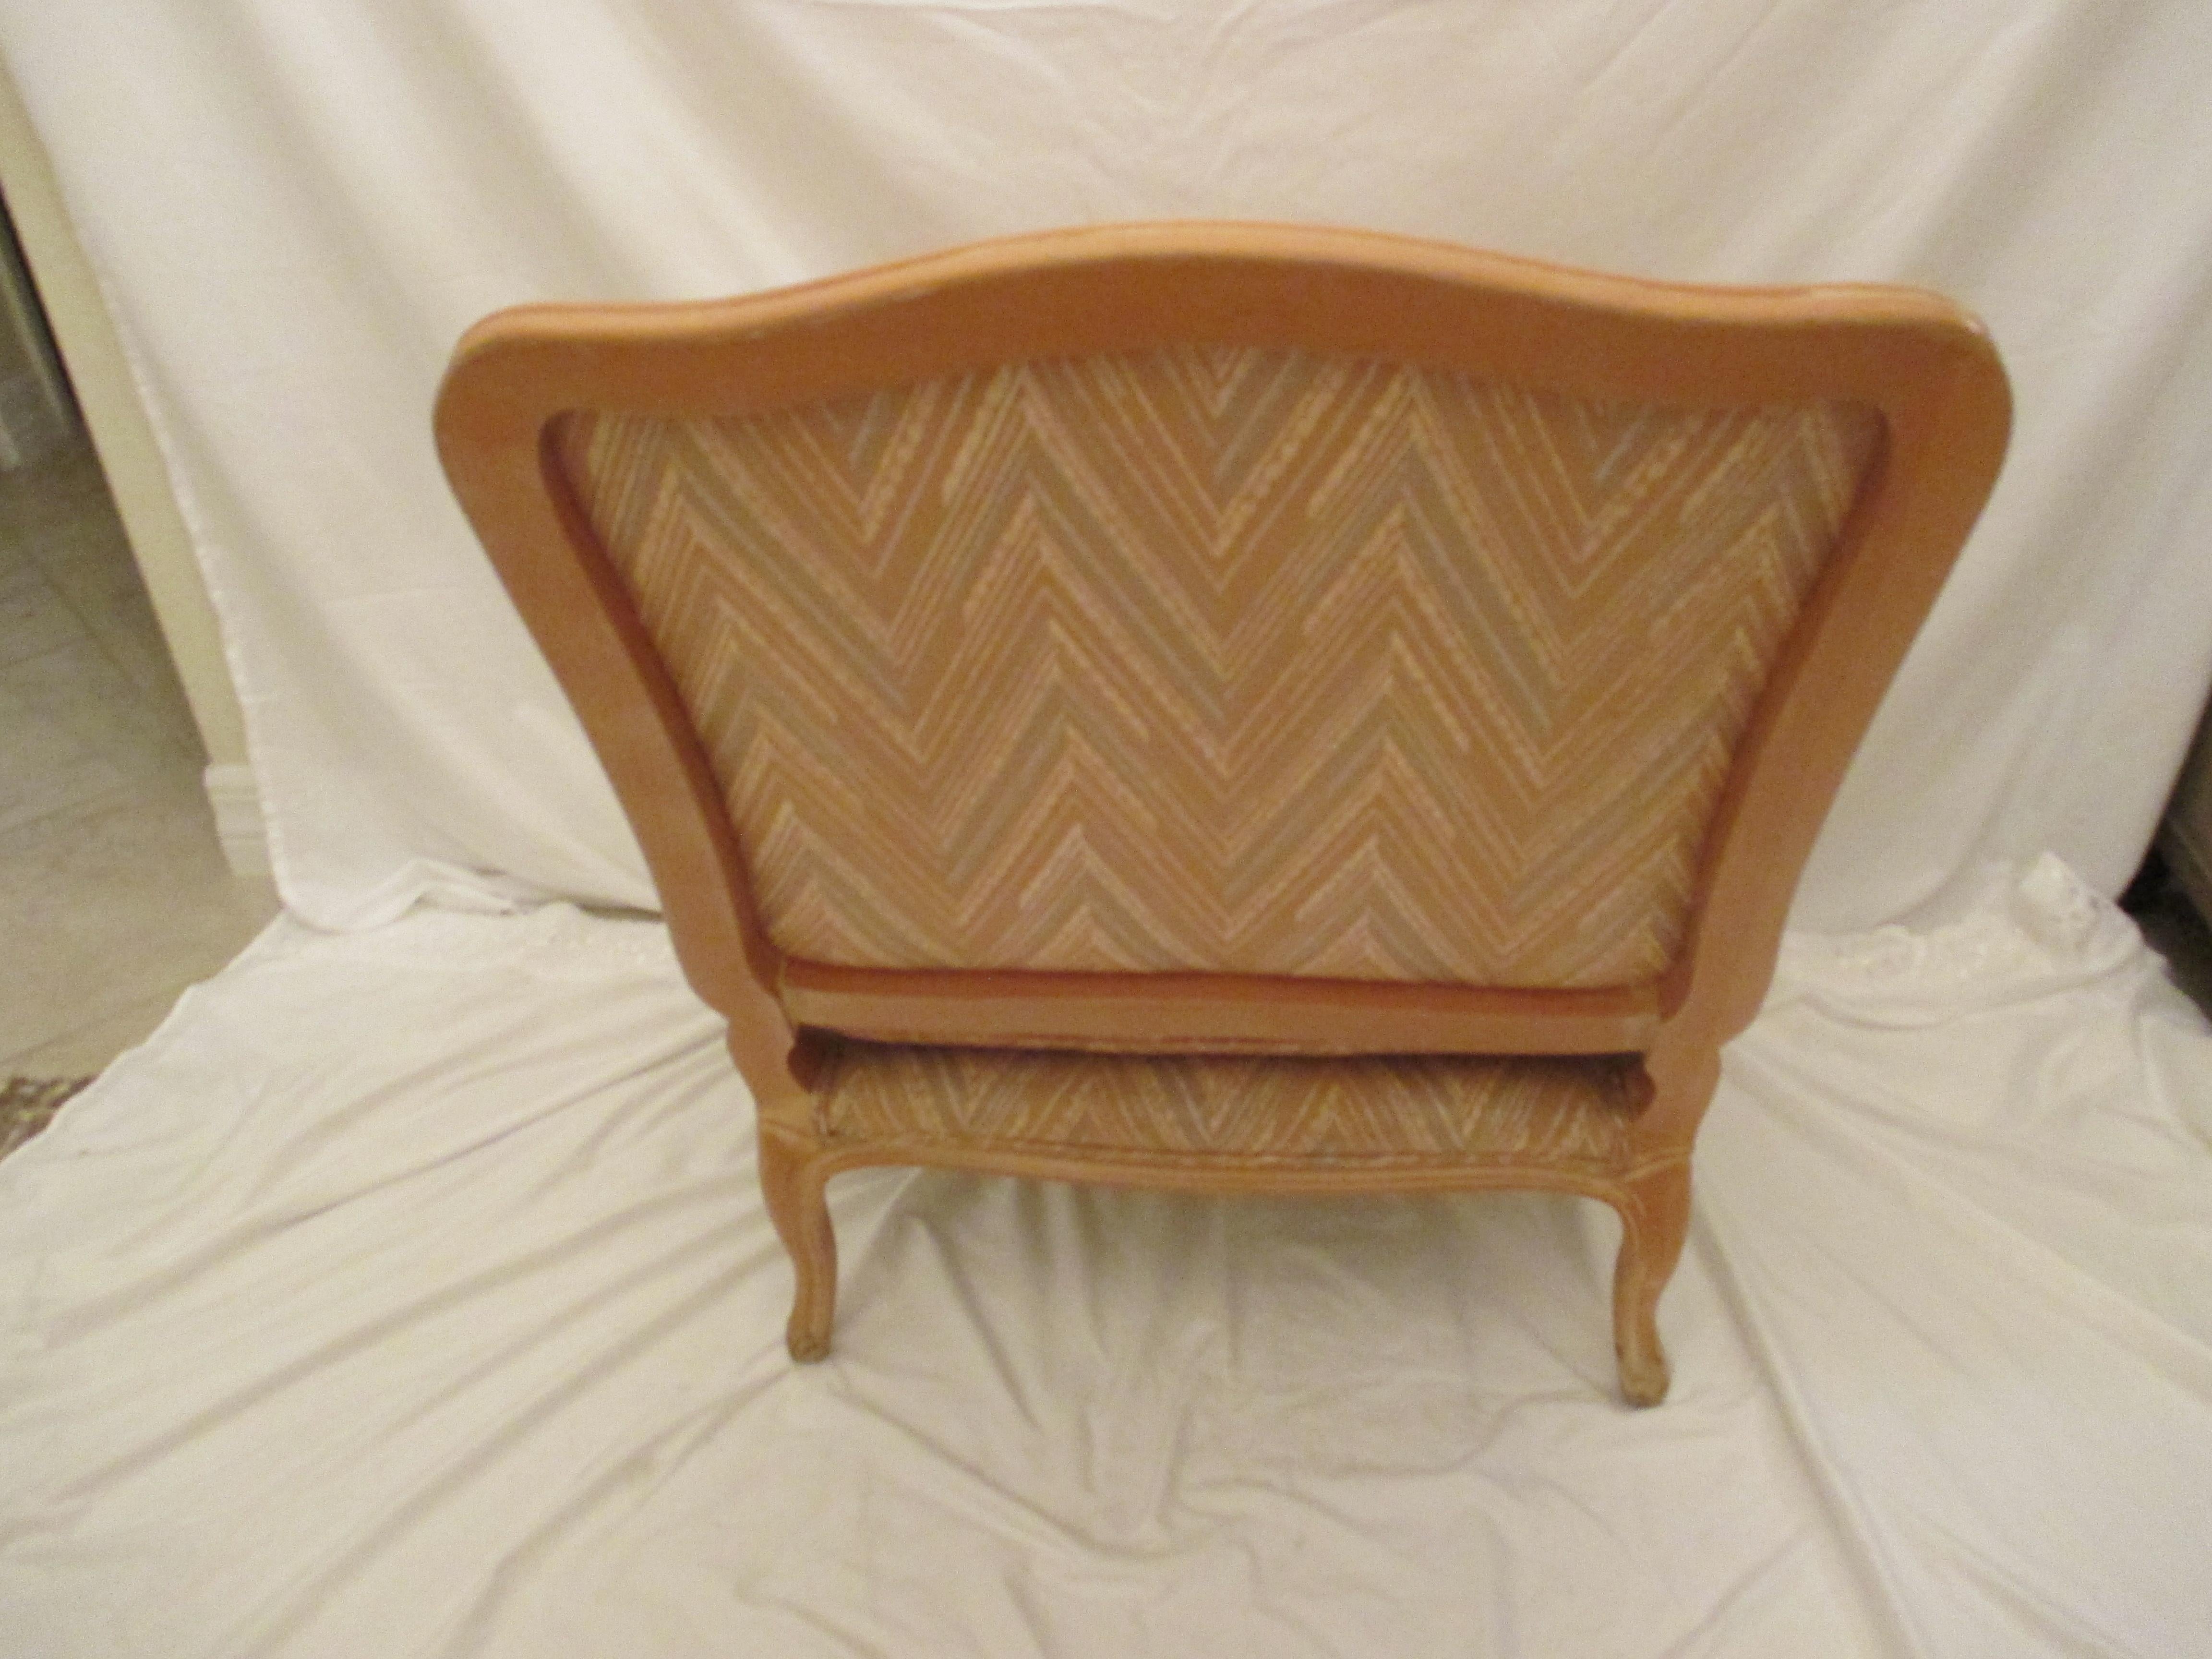 Bergere chair with original chevron chintz upholstery in good condition. Chair has lumbar pillow that is included.